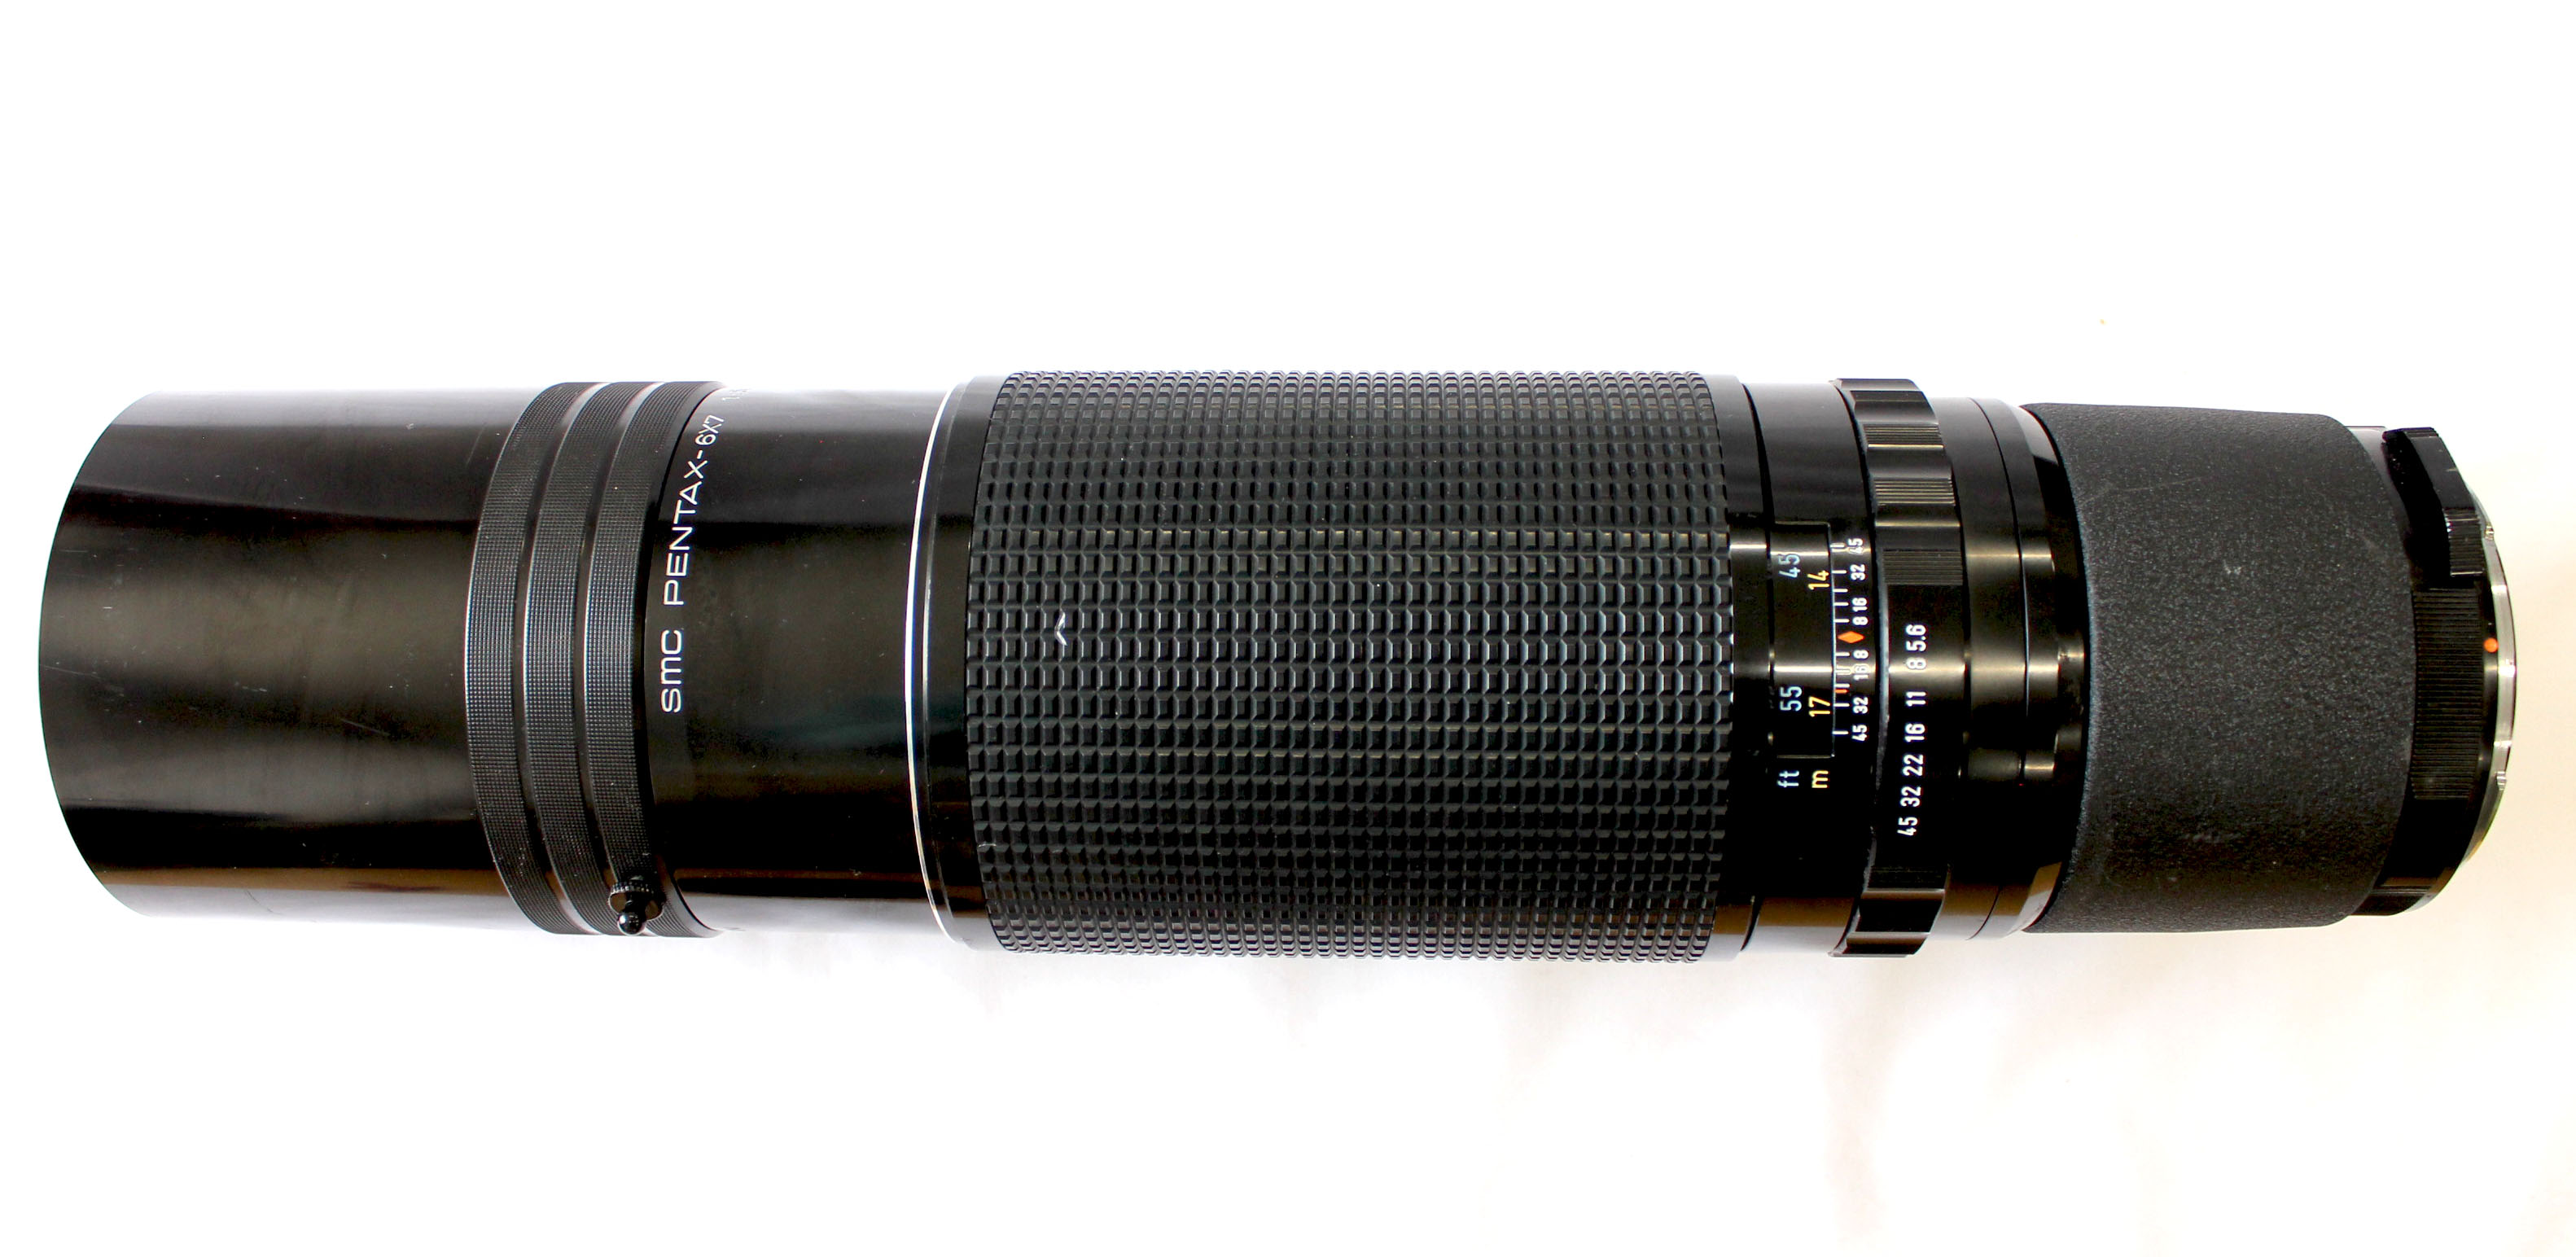  SMC PENTAX 6x7 500mm F/5.6 MF Telephoto Lens for 6x7 67 67II from Japan Photo 7